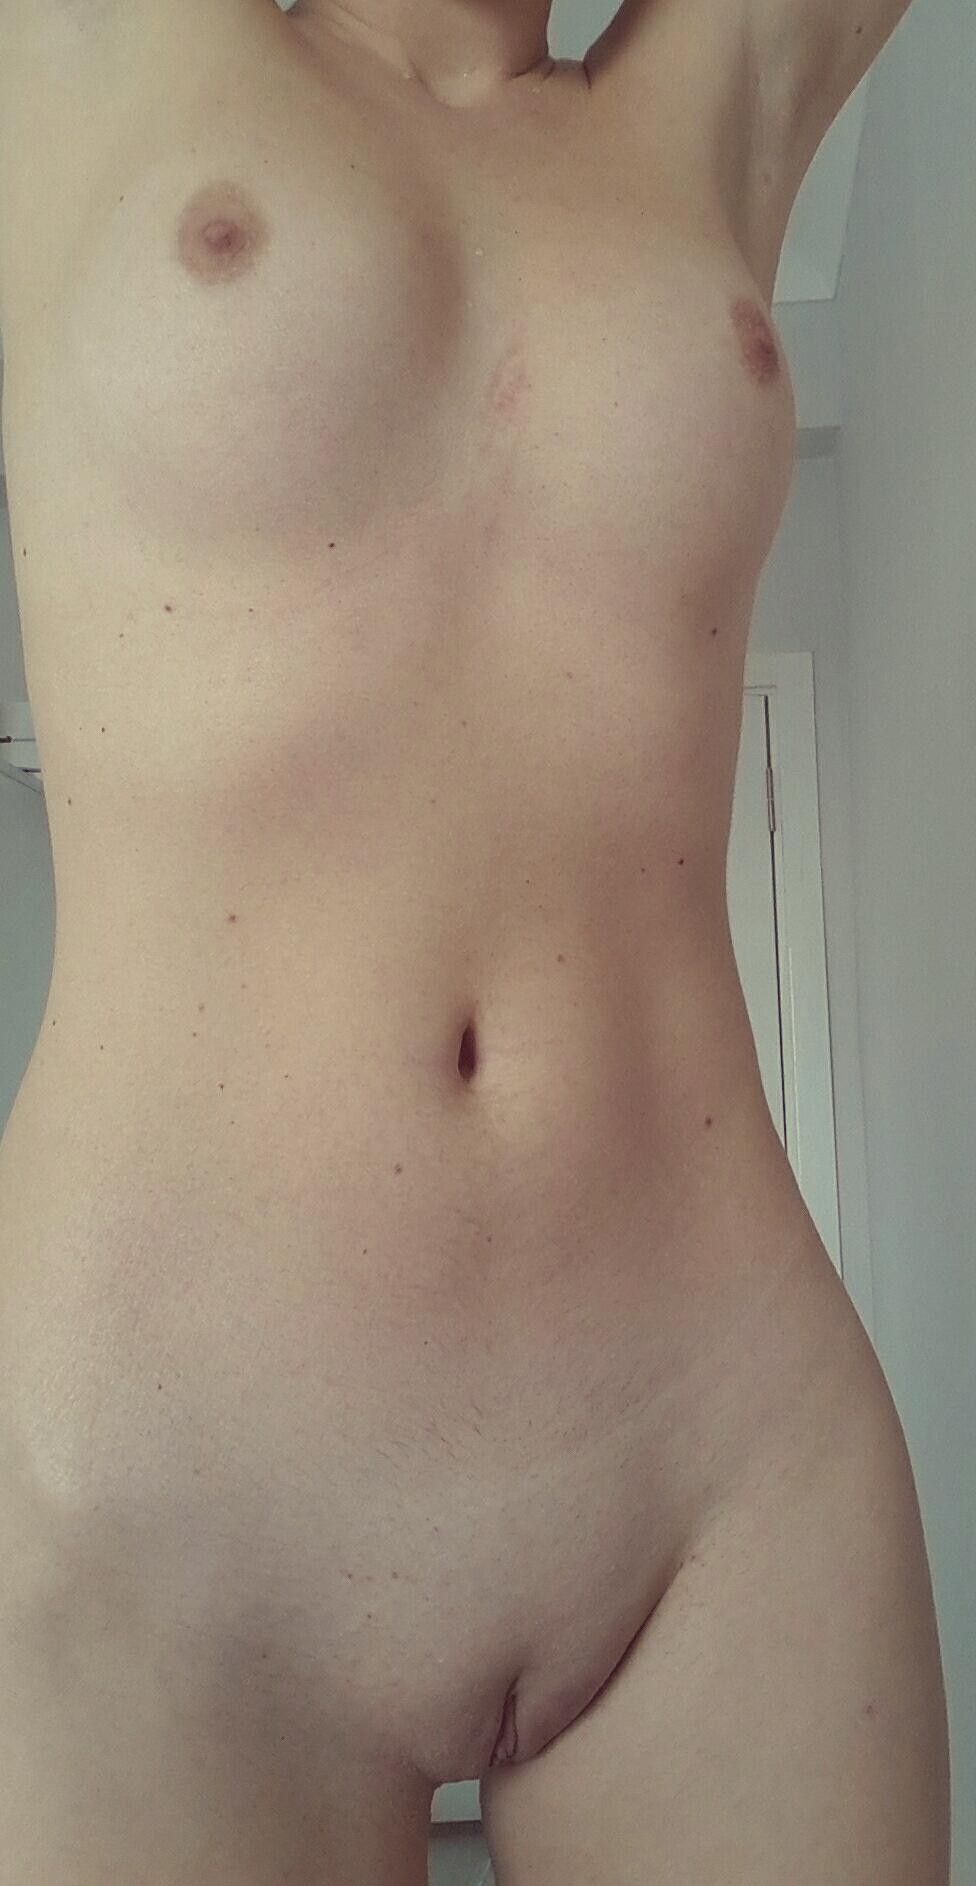 What Do You Think About My Body NSF